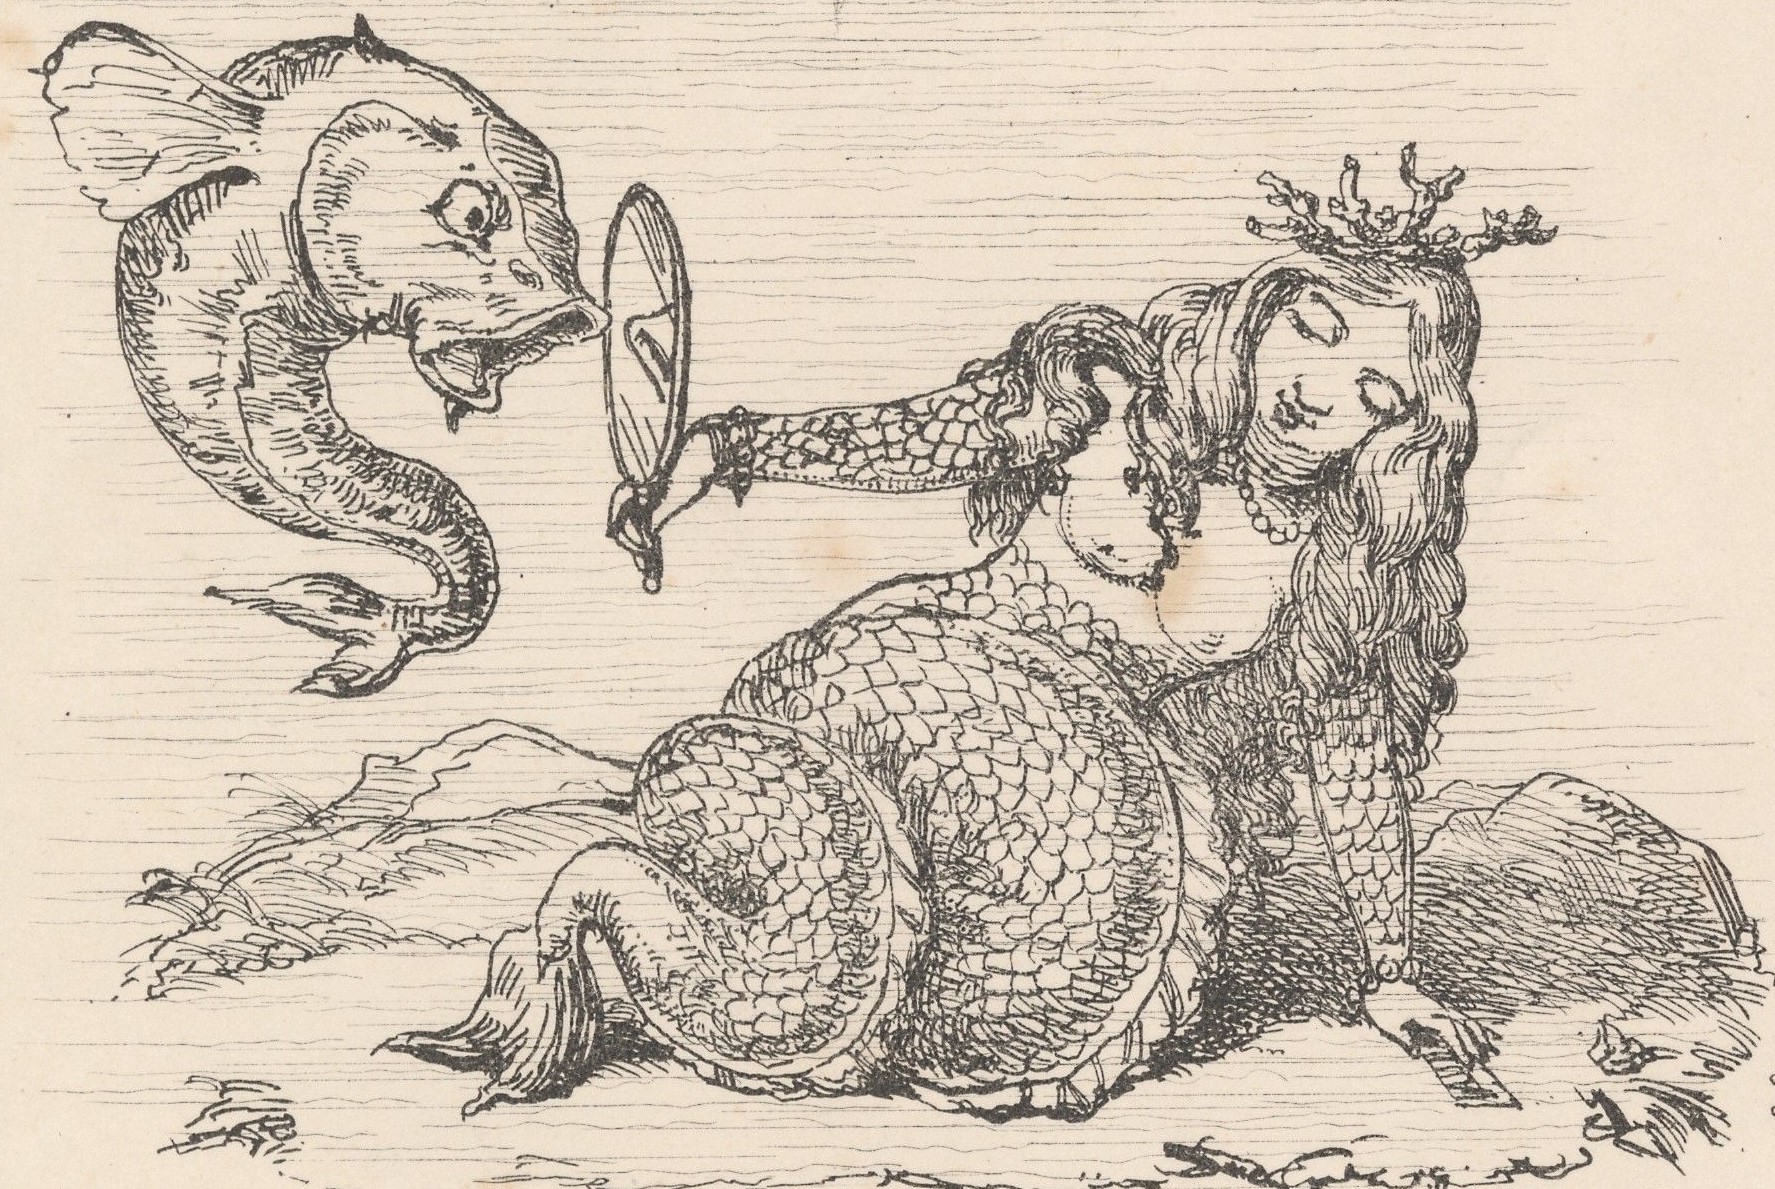 An etching of a mermaid reclining on the sea-bed, holding up a mirror to a passing fish.